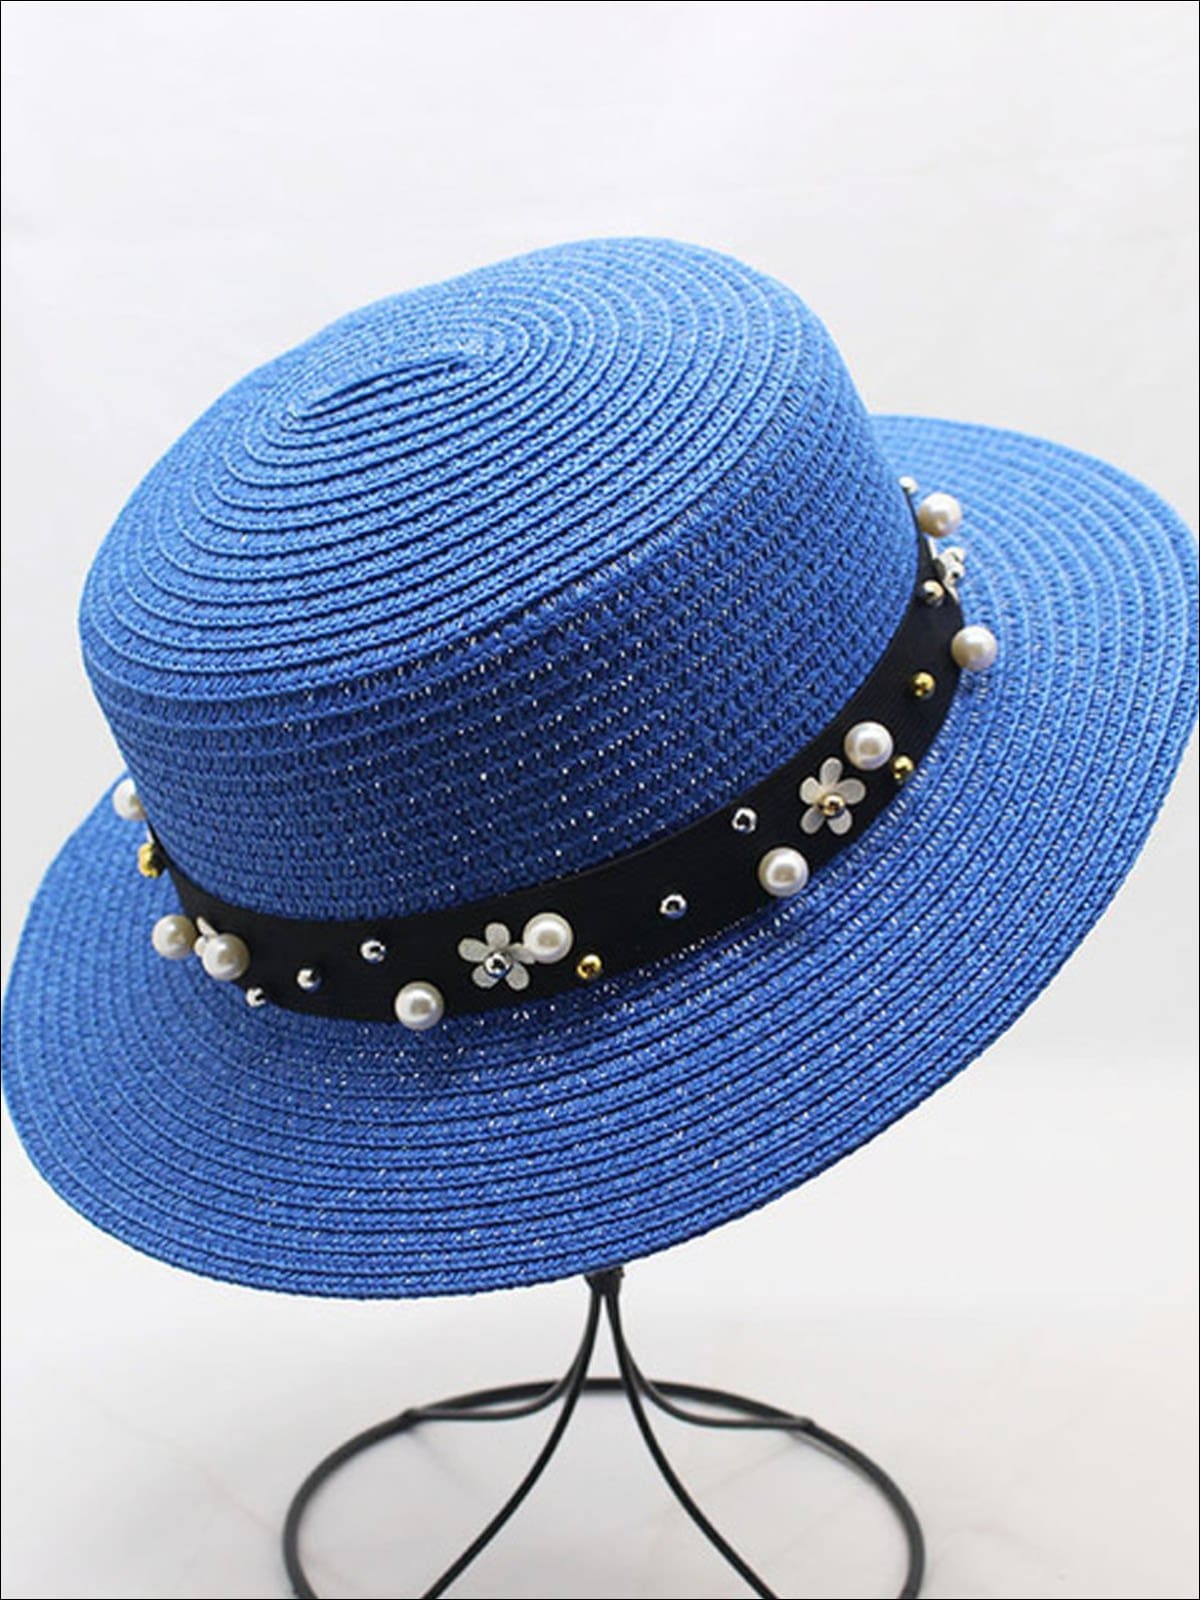 Girls Flower and Pearl Embellished Straw Hat - Blue / One Size - Girls Hats